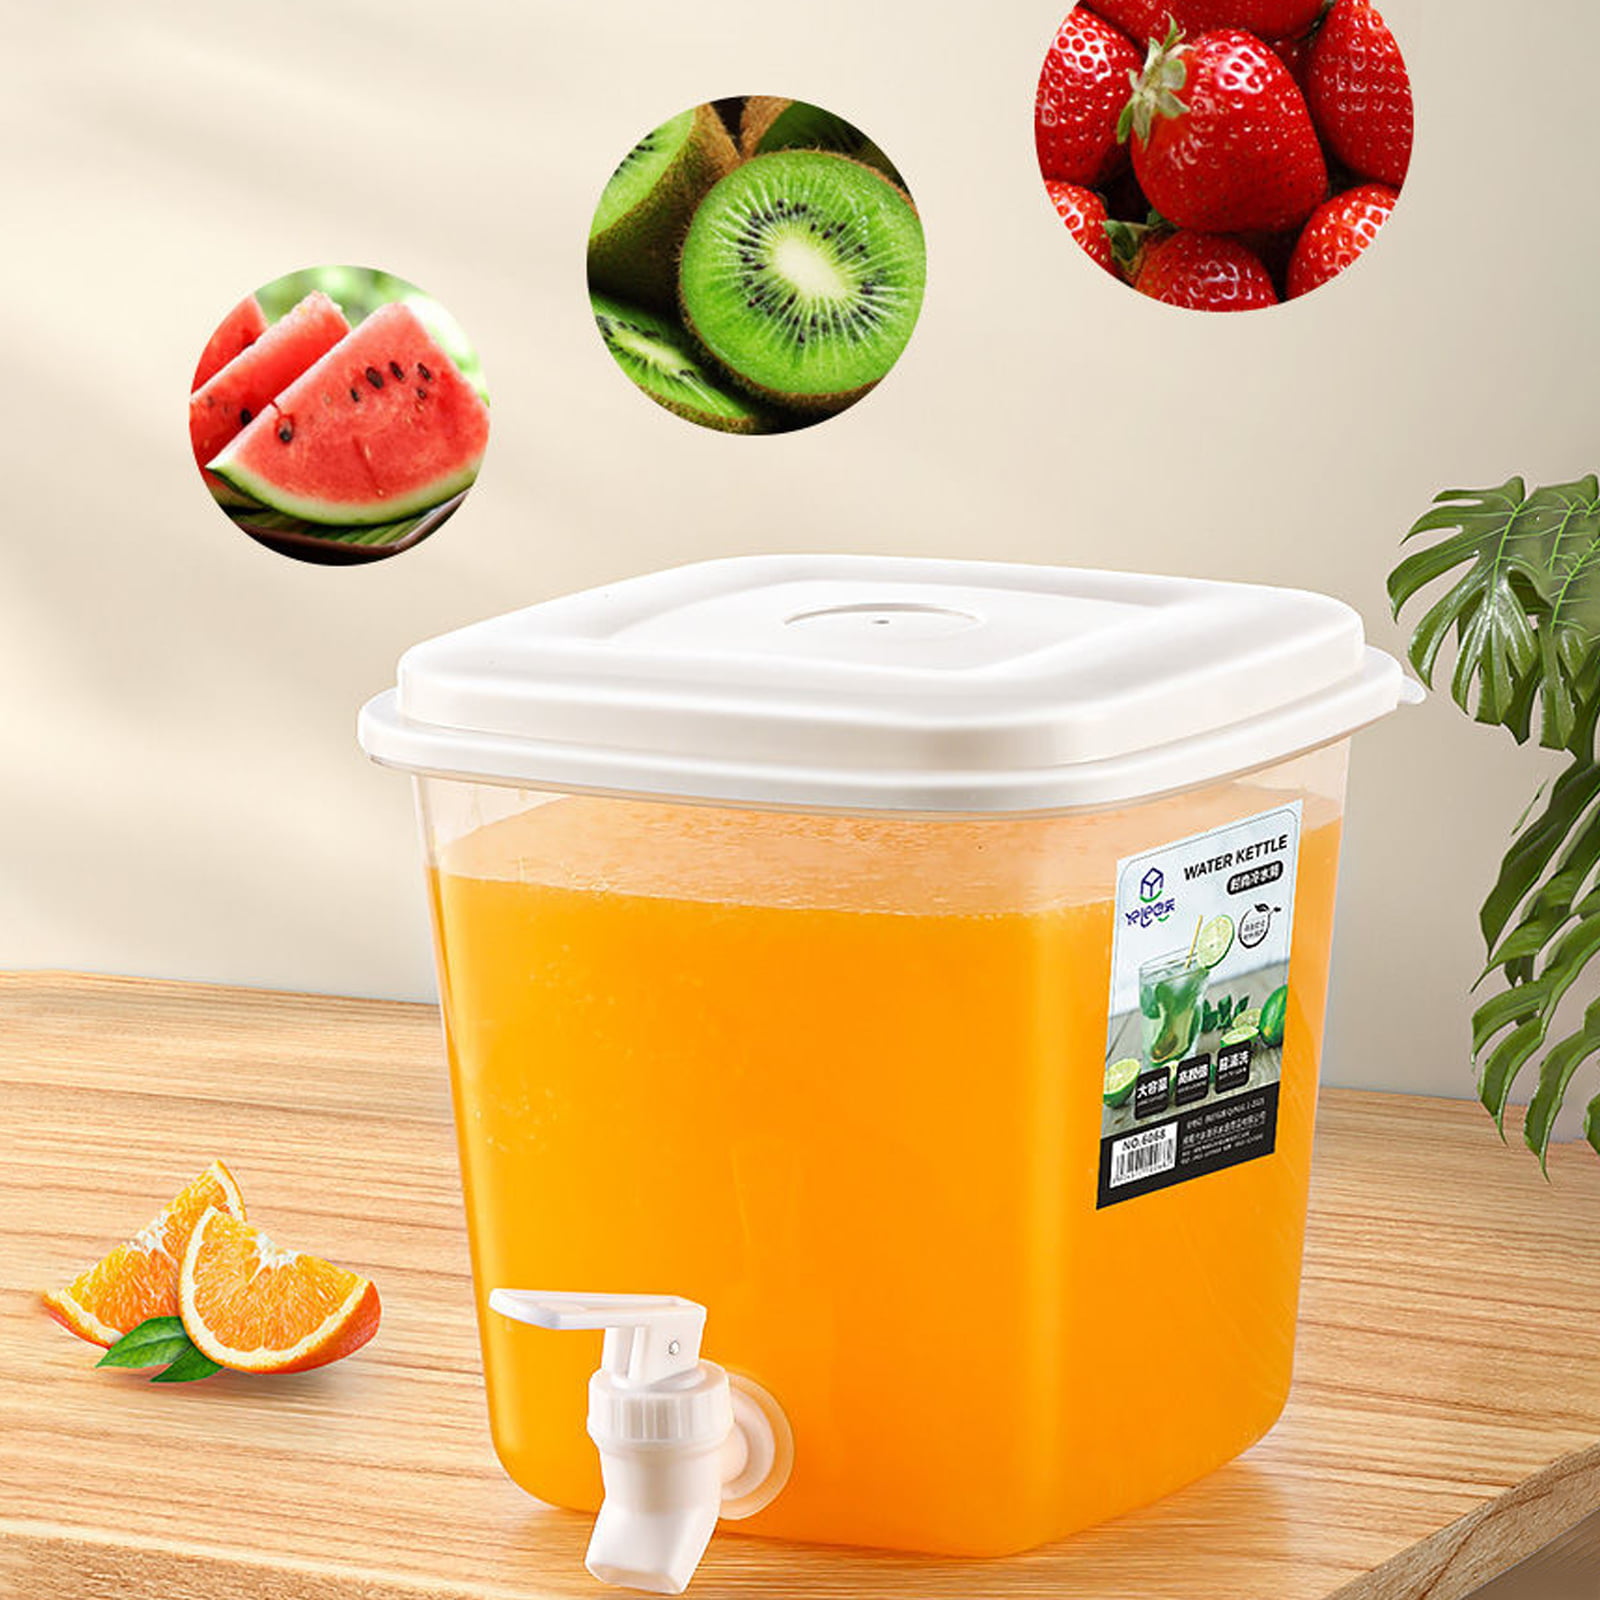 MANMAOHE 1 Gallon Refrigerator Cold Kettle with Faucet Plastic Drink  Dispenser with Spigot for Fridge Clear Beverage Dispenser Refrigerator  Juice